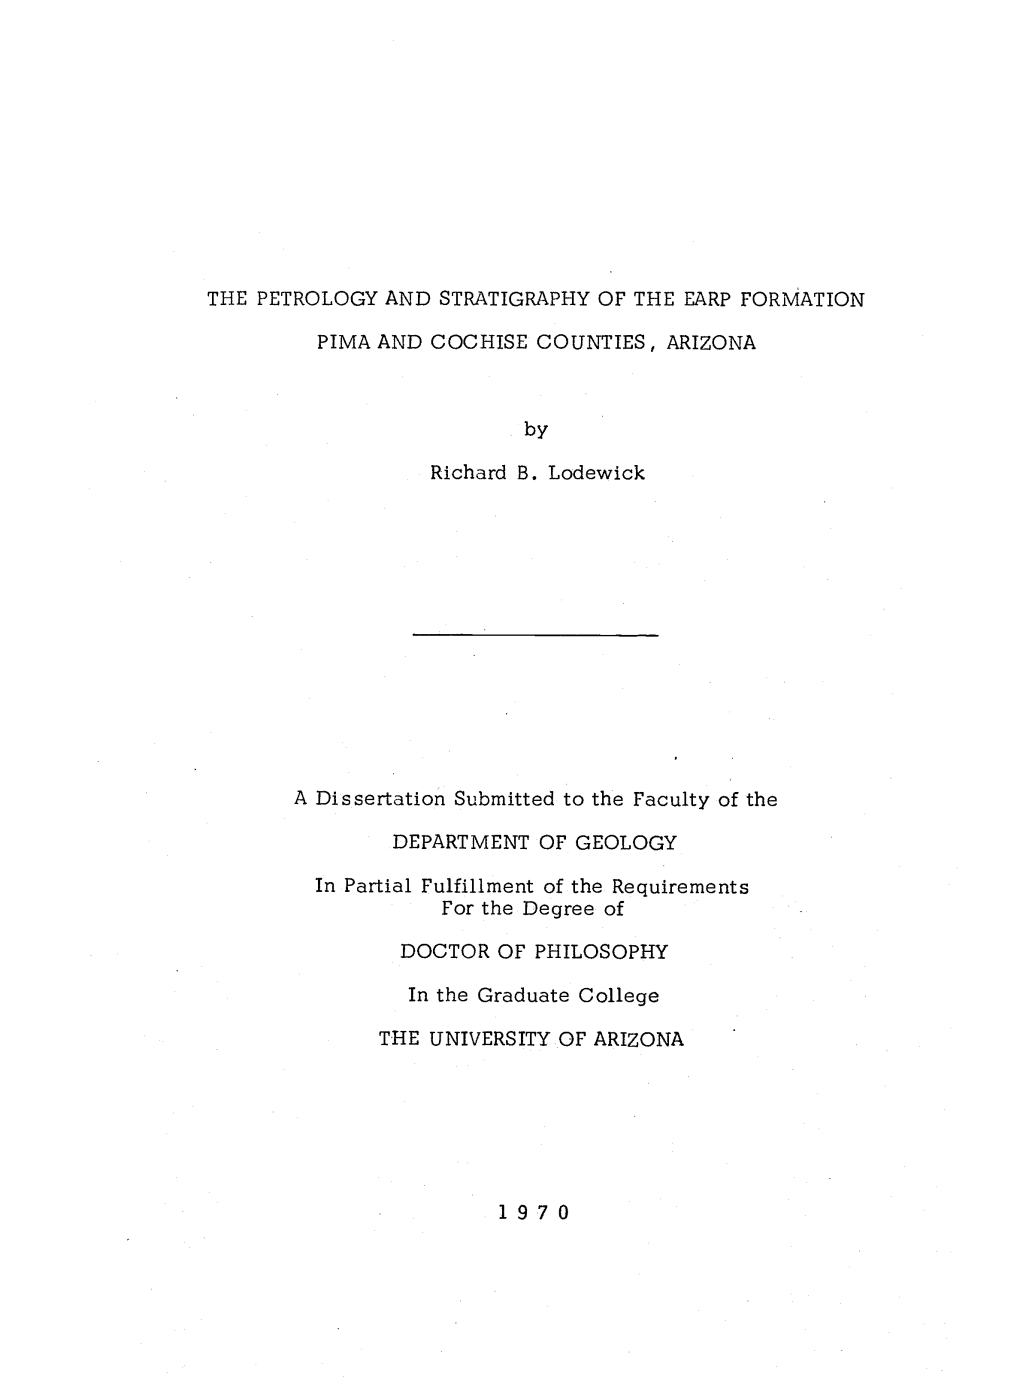 Richard B. Lodewick a Dissertation Submitted to the Faculty of the In